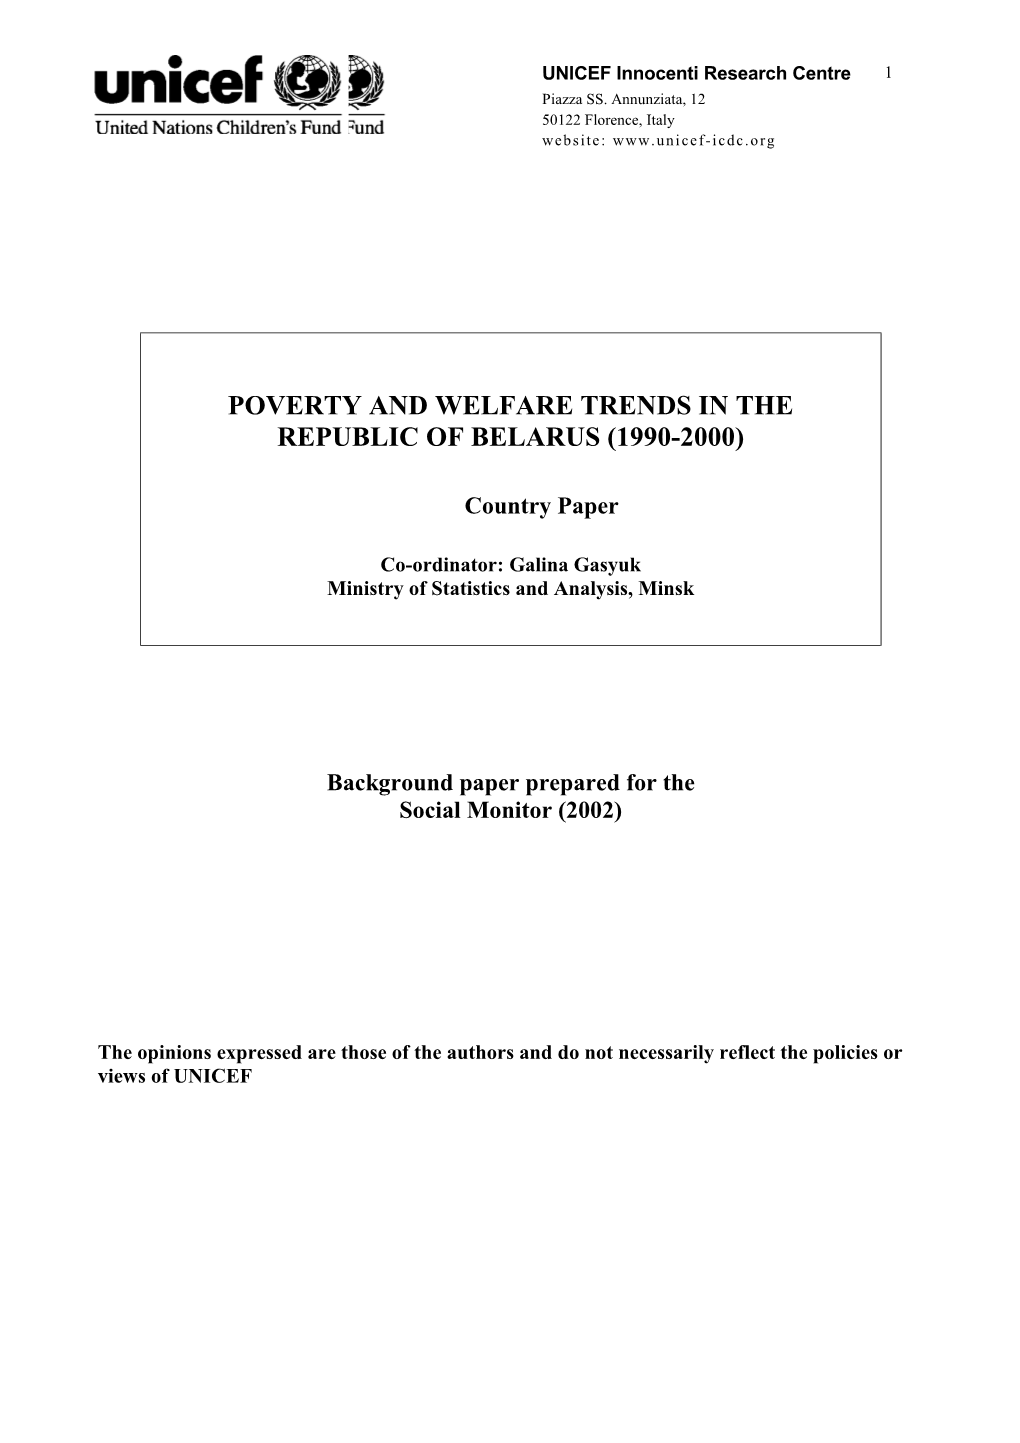 Poverty and Welfare Trends in the Republic of Belarus (1990-2000)